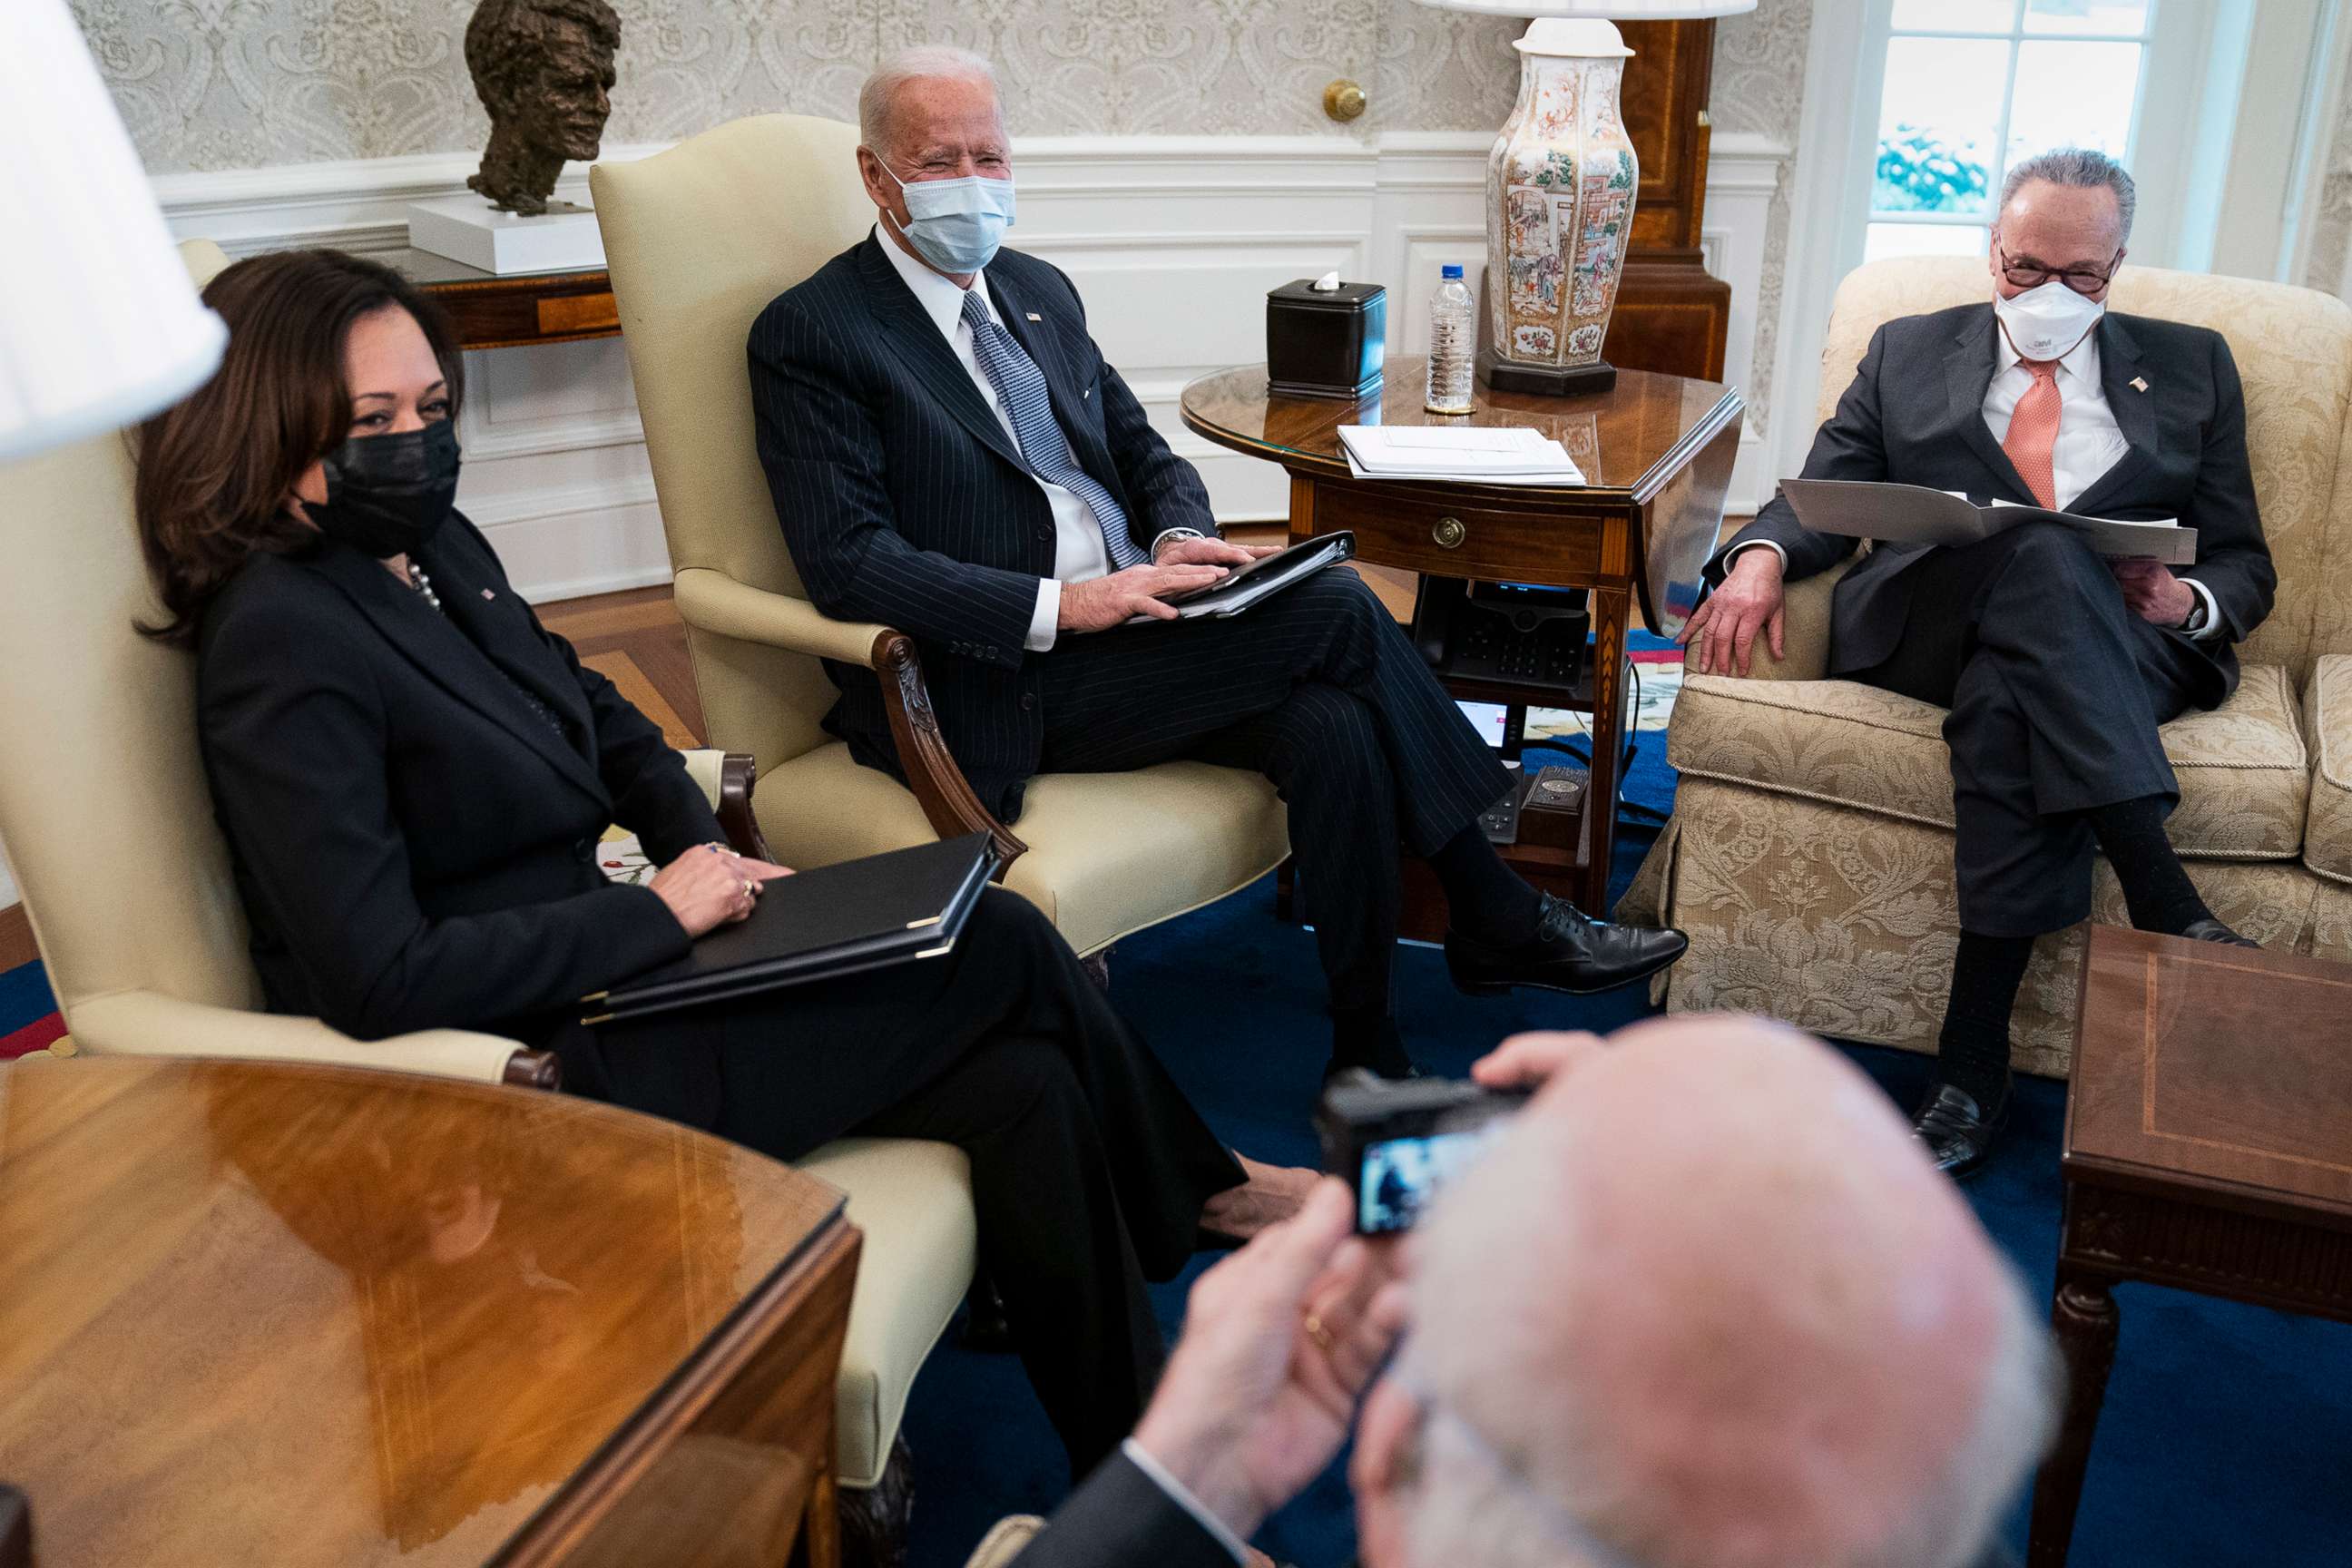 PHOTO: Sen. Patrick Leahy takes a photo Vice President Kamala Harris, President Joe Biden, and Senate Majority Leader Sen. Chuck Schumer, during a meeting to discuss a coronavirus relief package, in the Oval Office of the White House, Feb. 3, 2021.